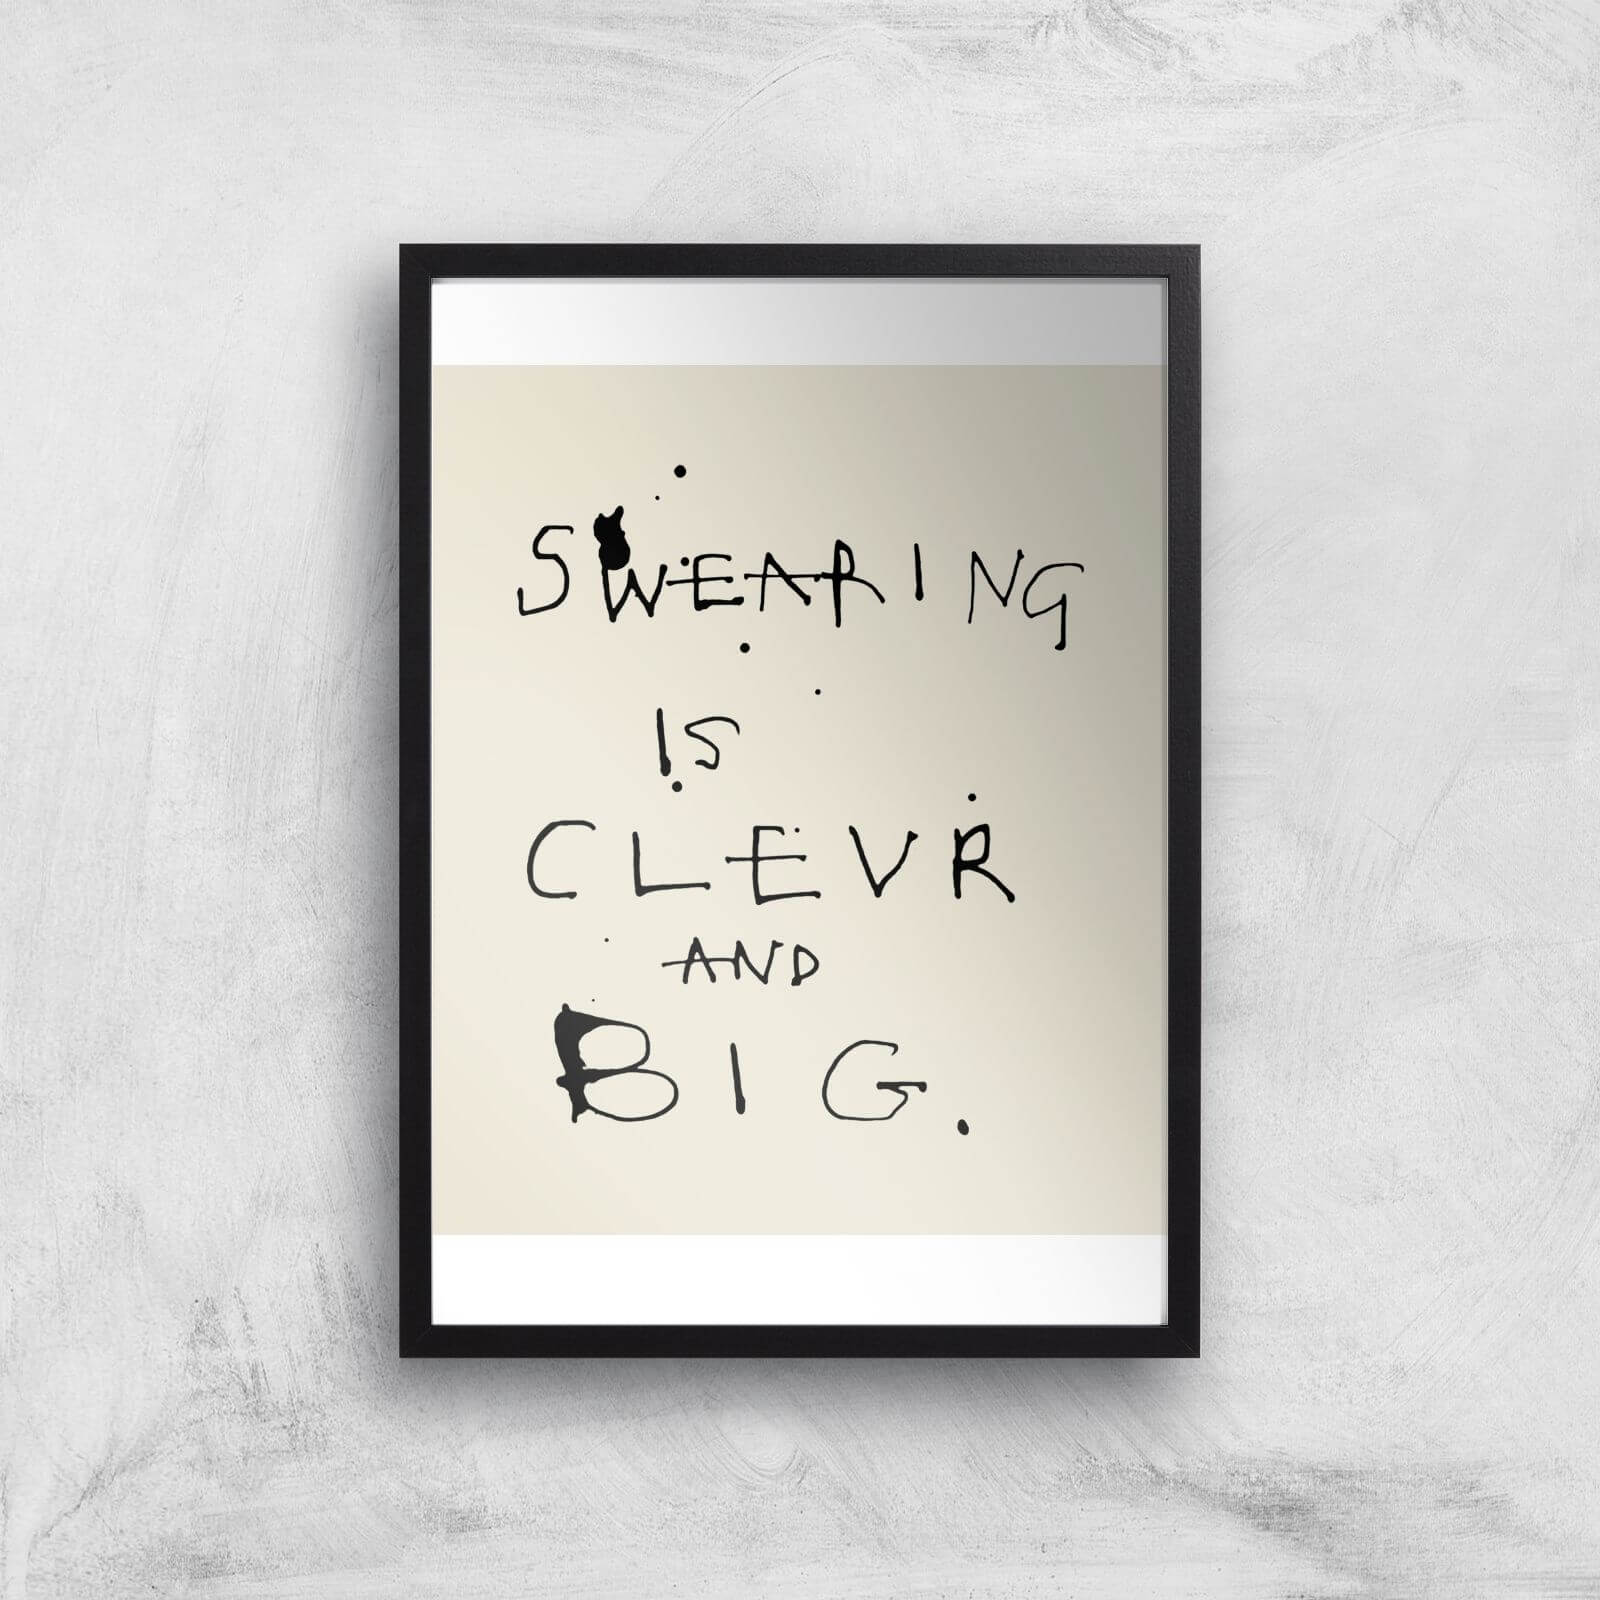 Poet and Painter Swearing Is Giclee Art Print - A4 - Print Only